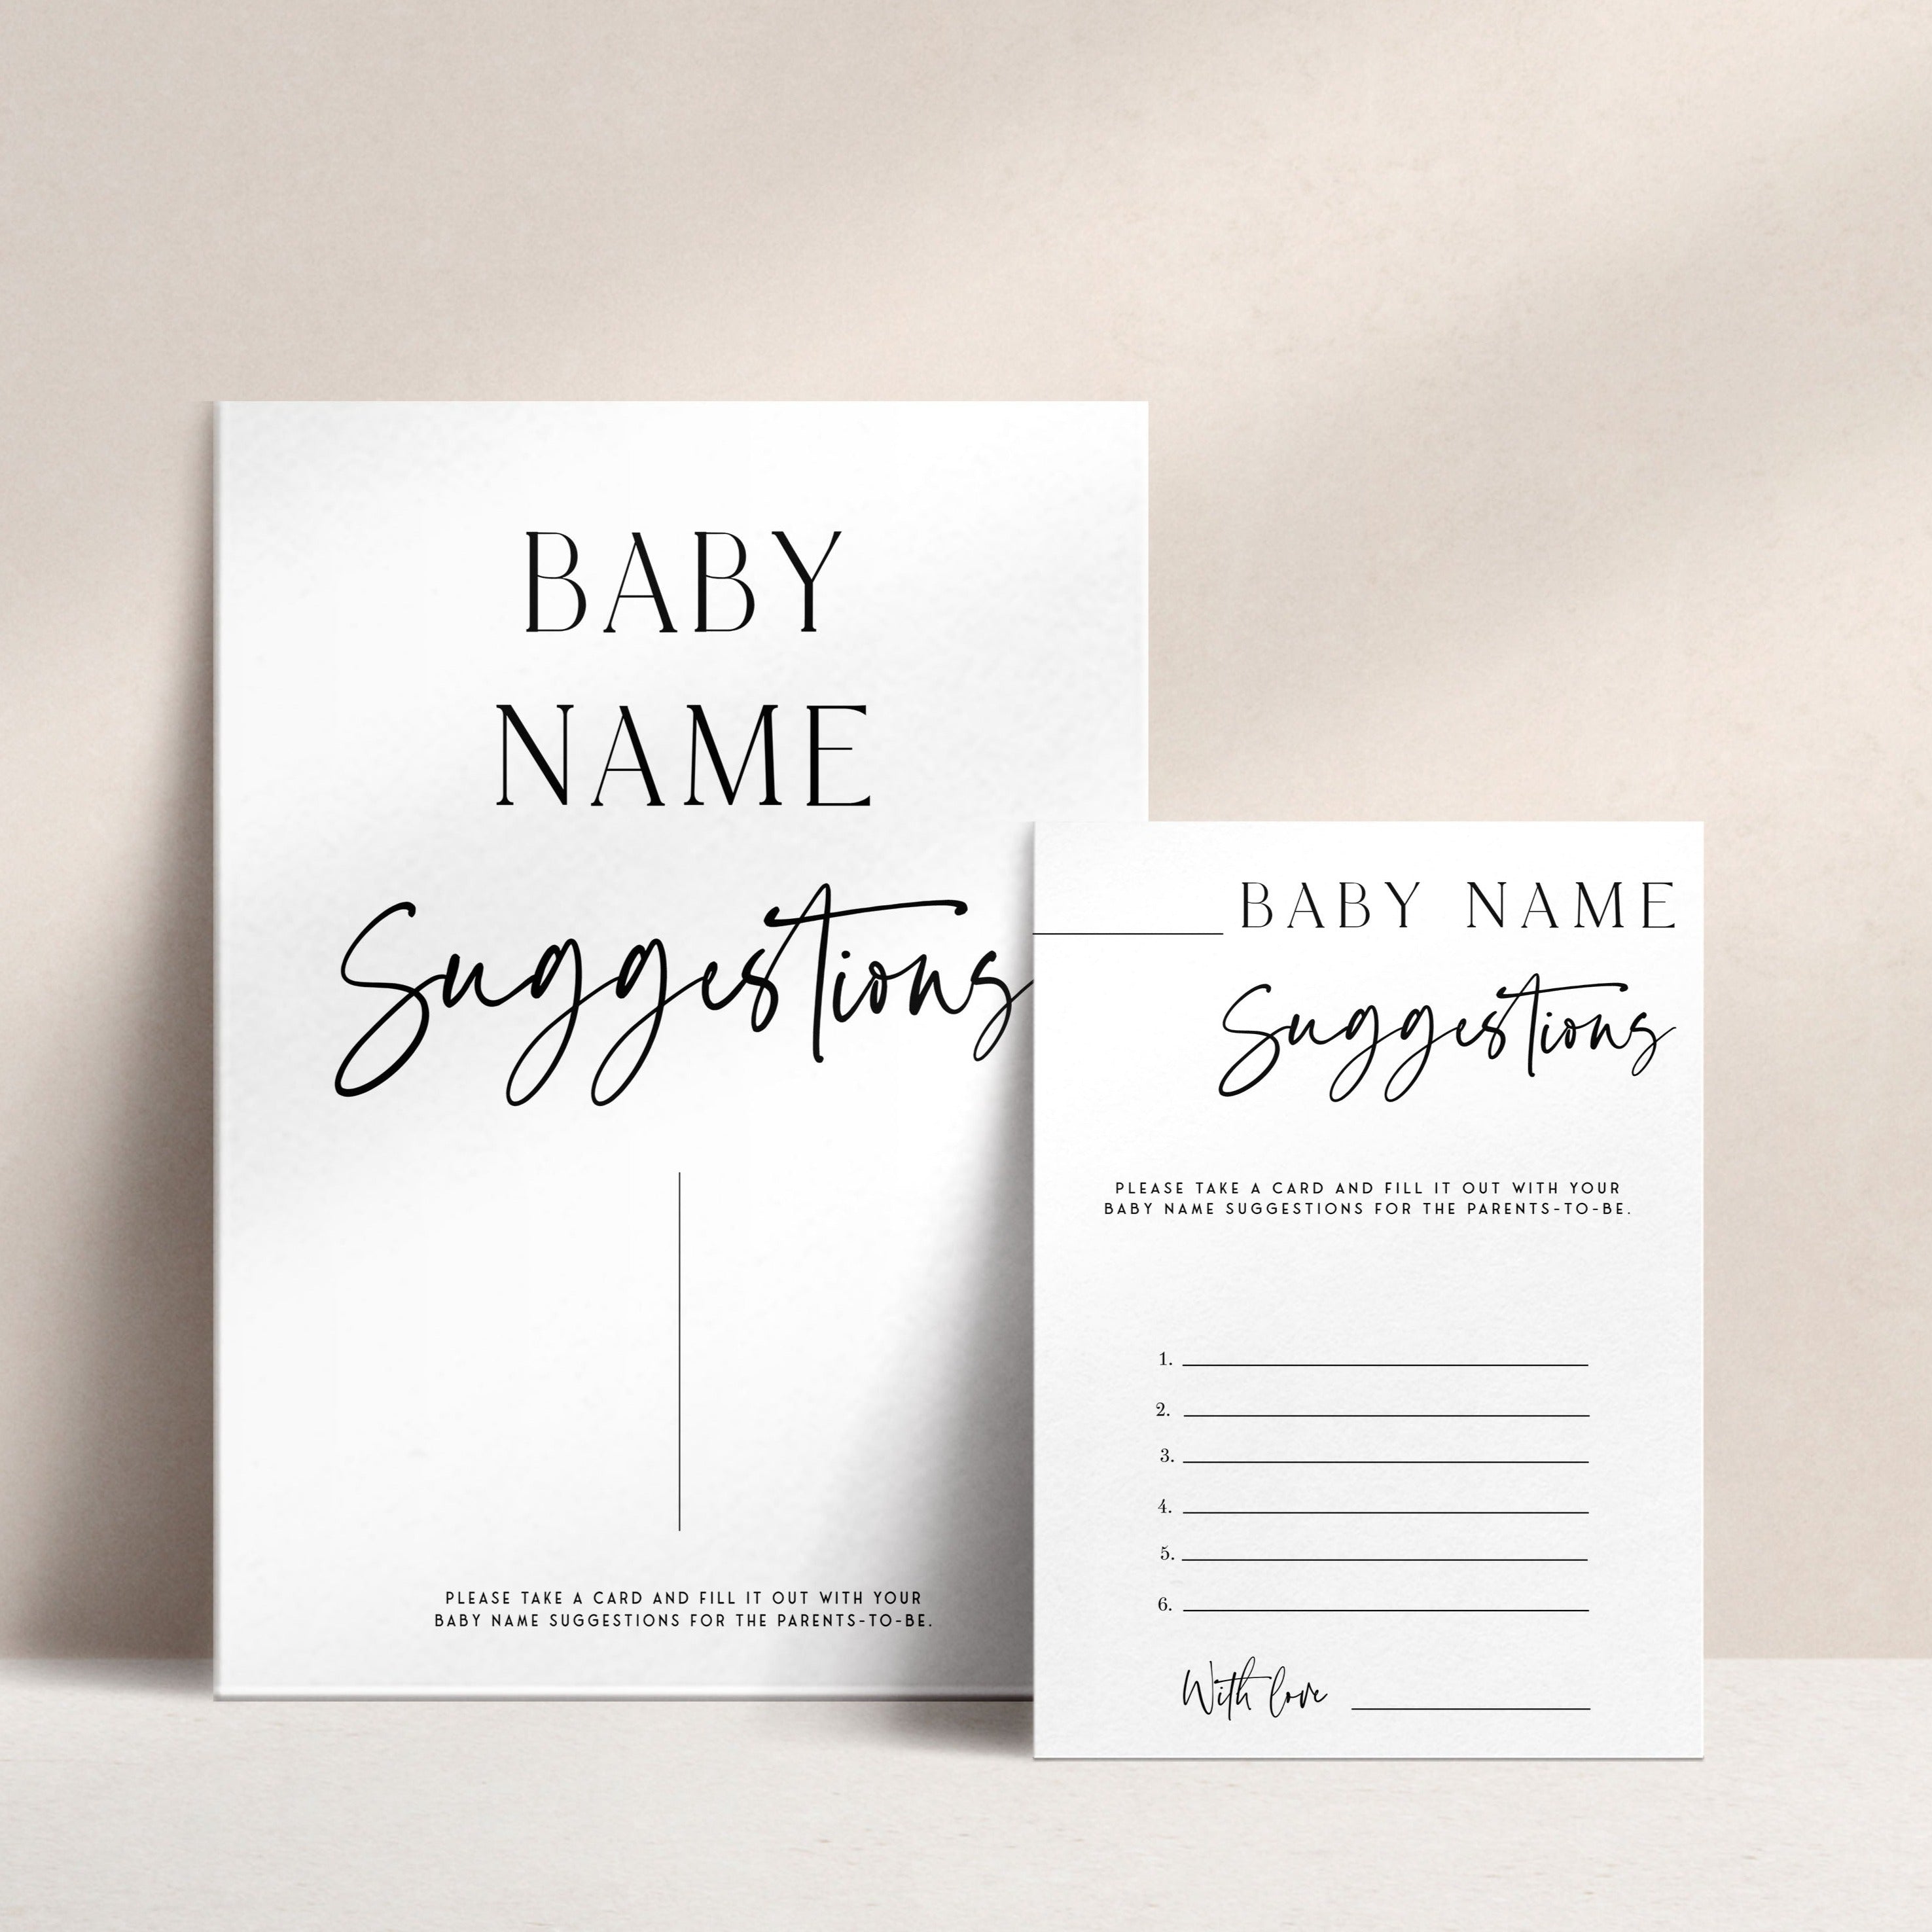 baby name suggestions baby shower game, printable baby shower games, editable baby shower games, modern baby shower games, minimalist baby shower